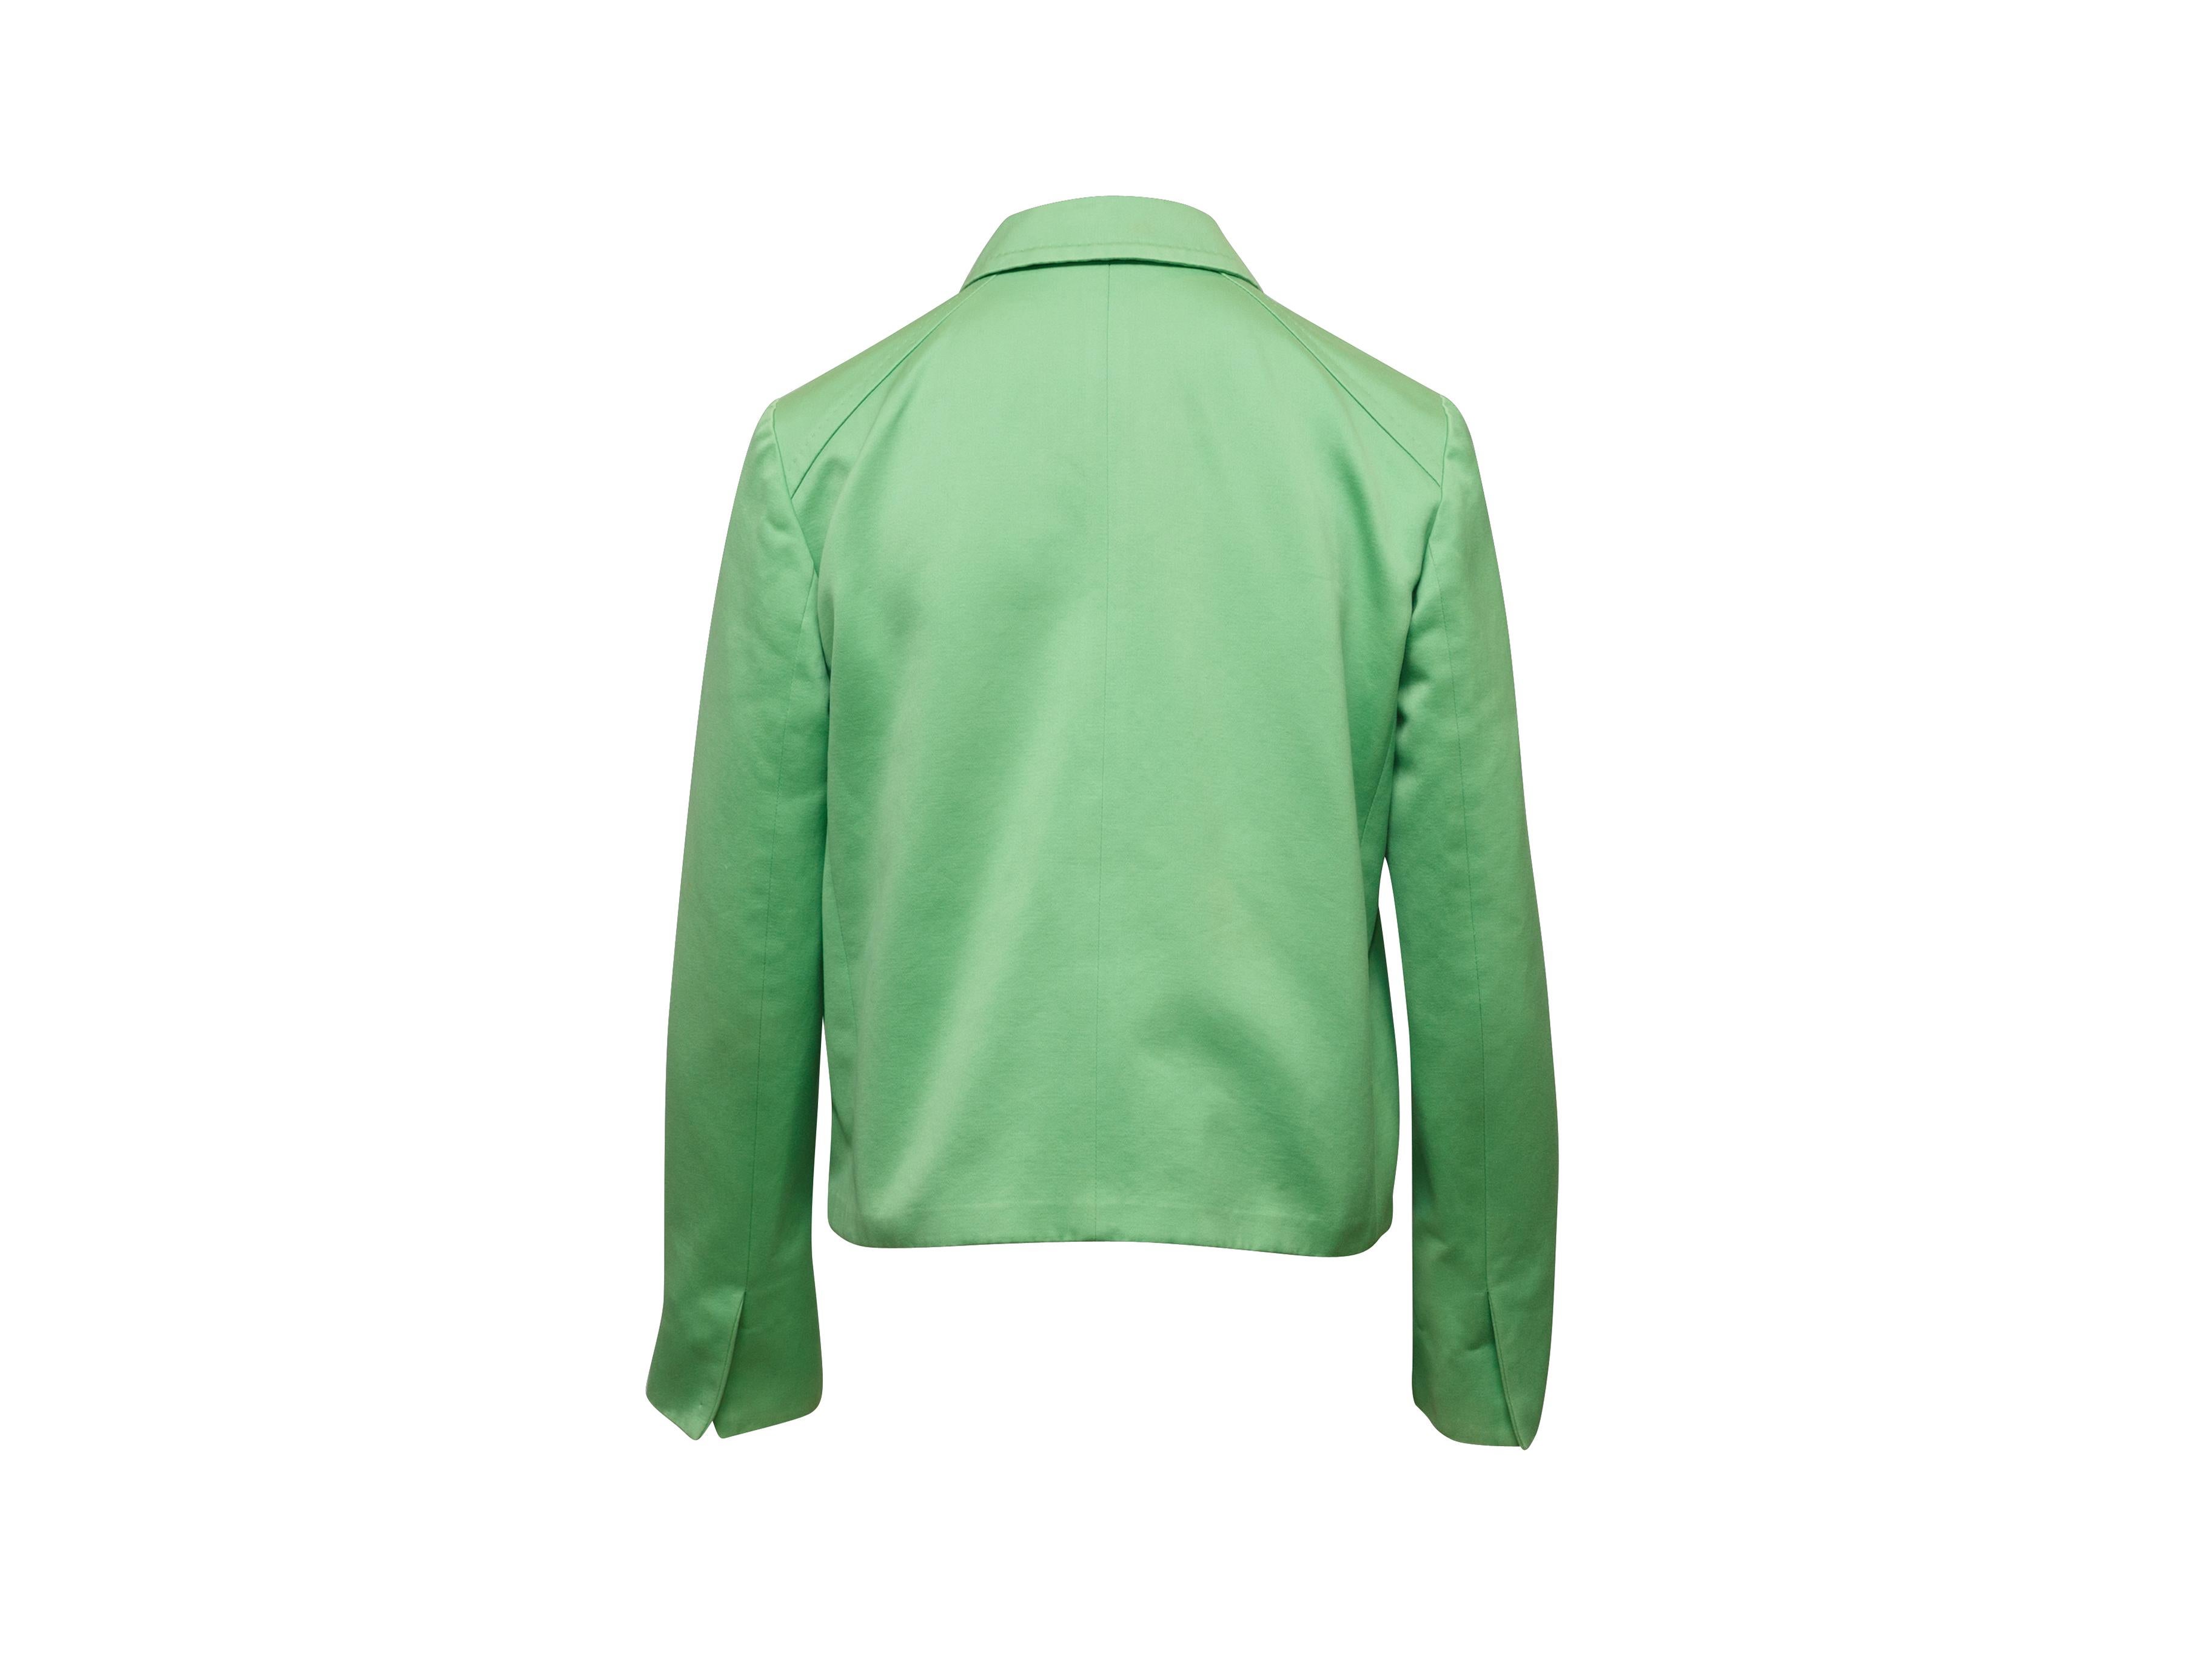 Product details: Green double-breasted lightweight jacket by Max Mara. Pointed collar. Dual pockets. Button closures at front. 32